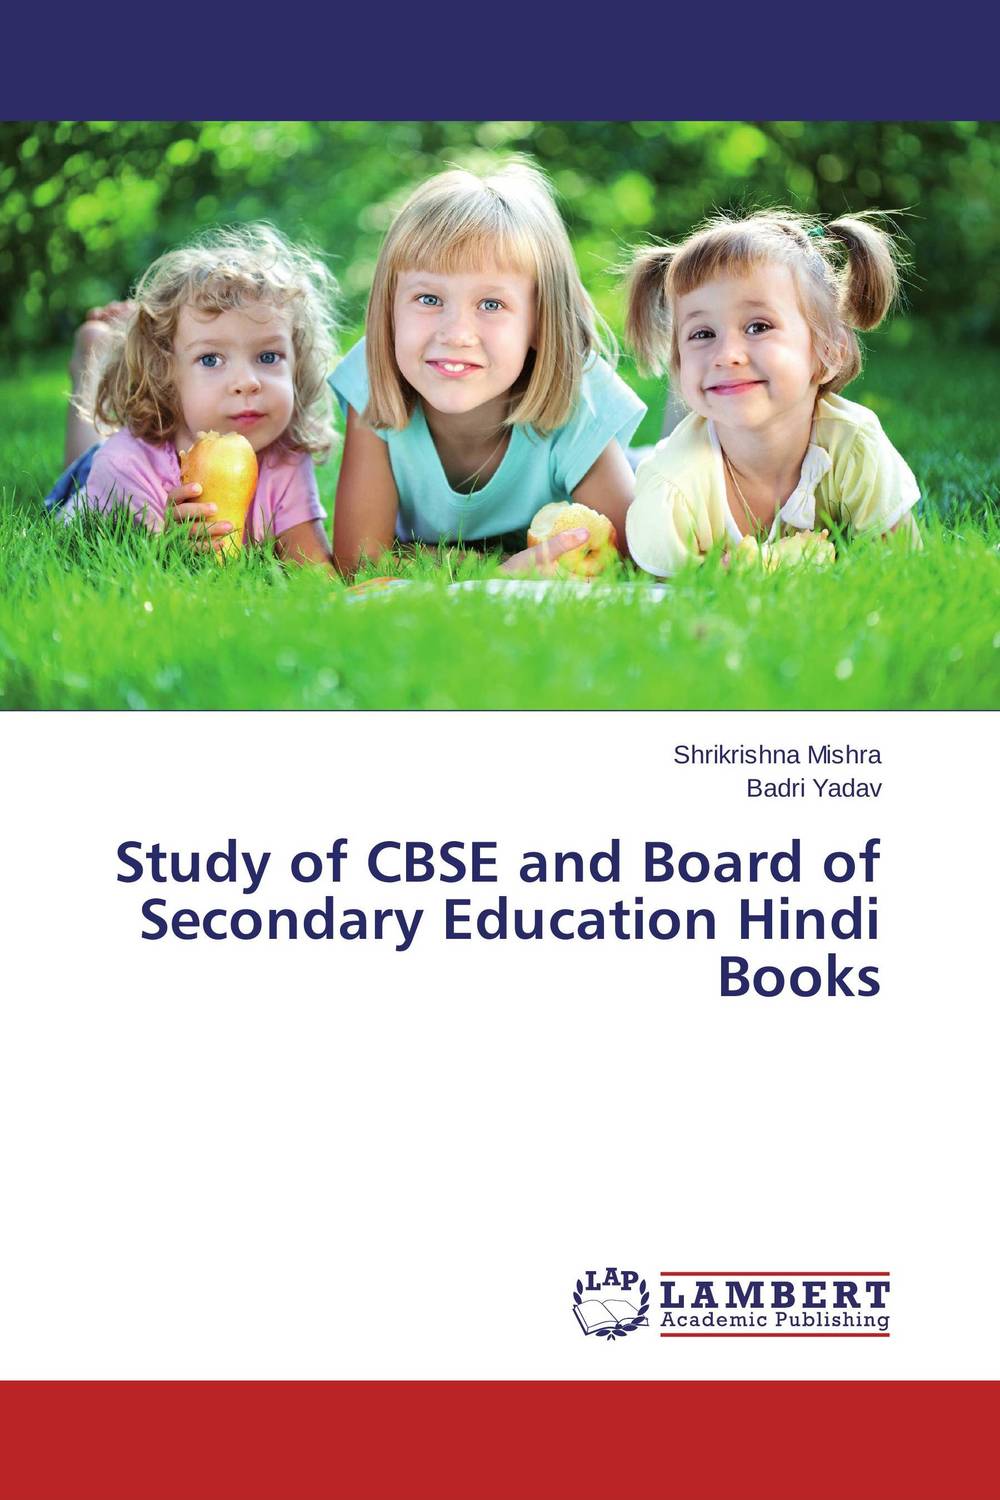 Study of CBSE and Board of Secondary Education Hindi Books